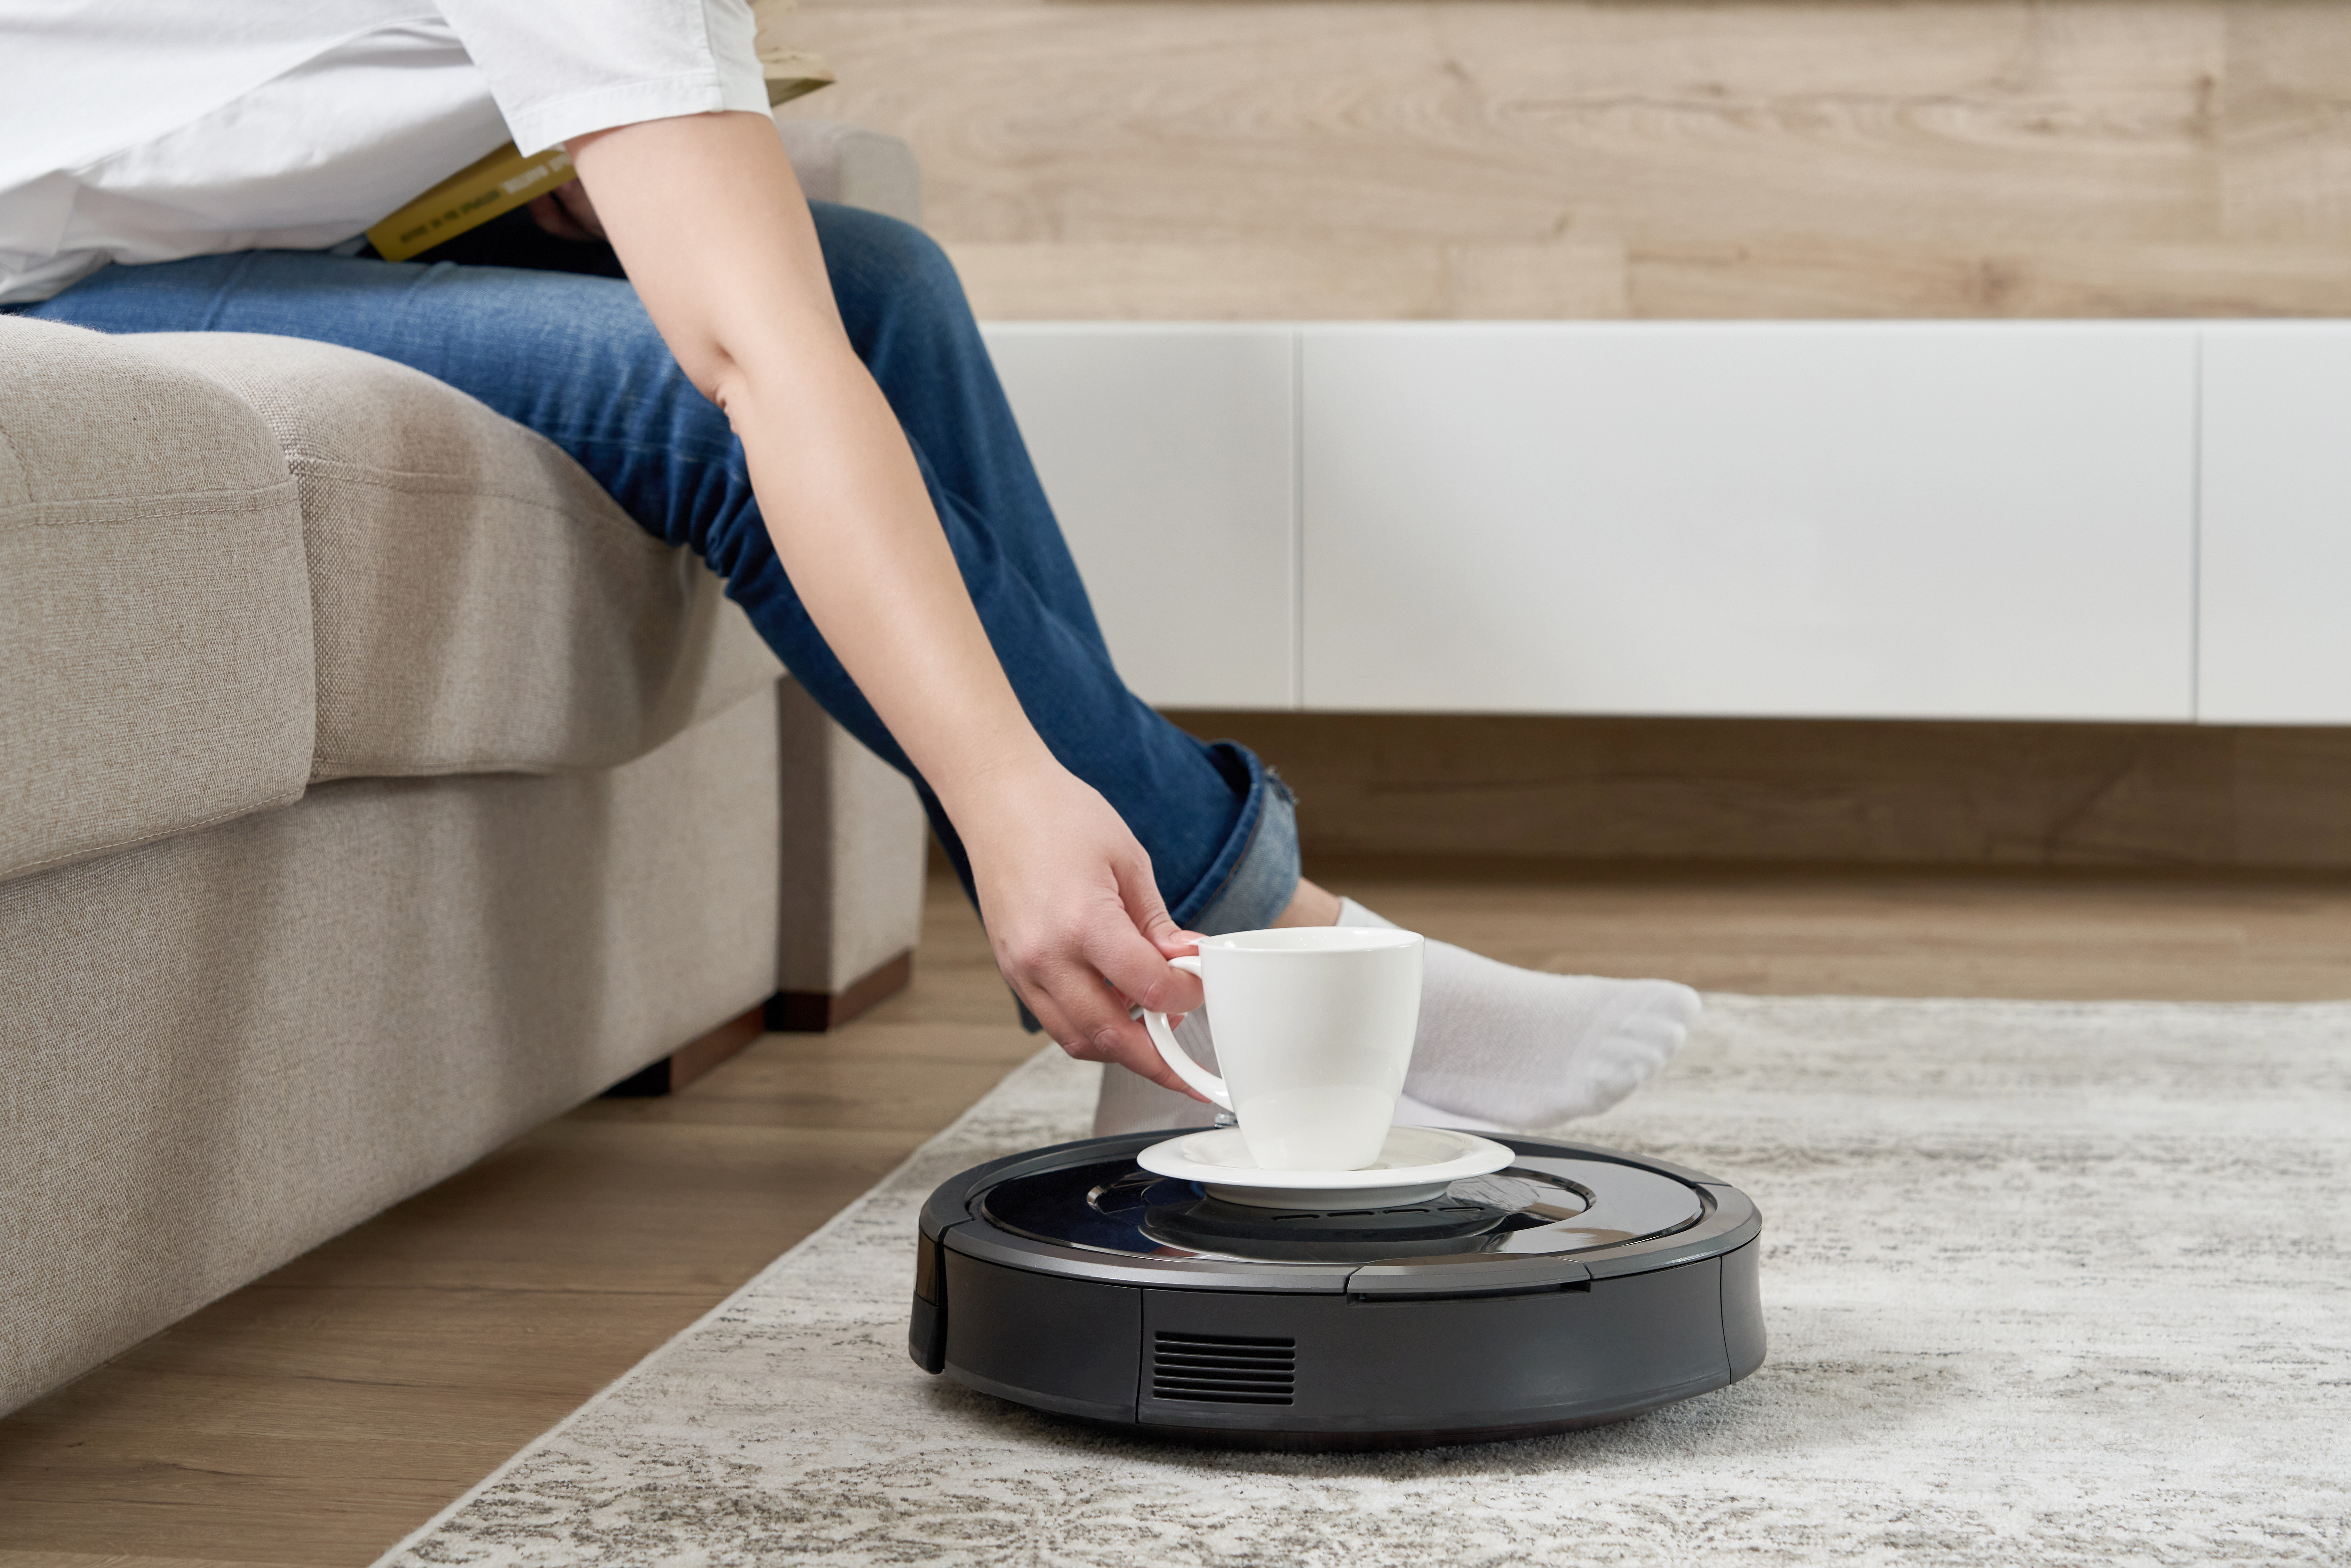 A robotic vacuum cleaner carries a tea cup across a living room floor. The vacuum cleaner is black and round, with two spinning brushes on the bottom. The tea cup is white. The vacuum cleaner is moving slowly and carefully, as if it is trying not to spill the tea. 